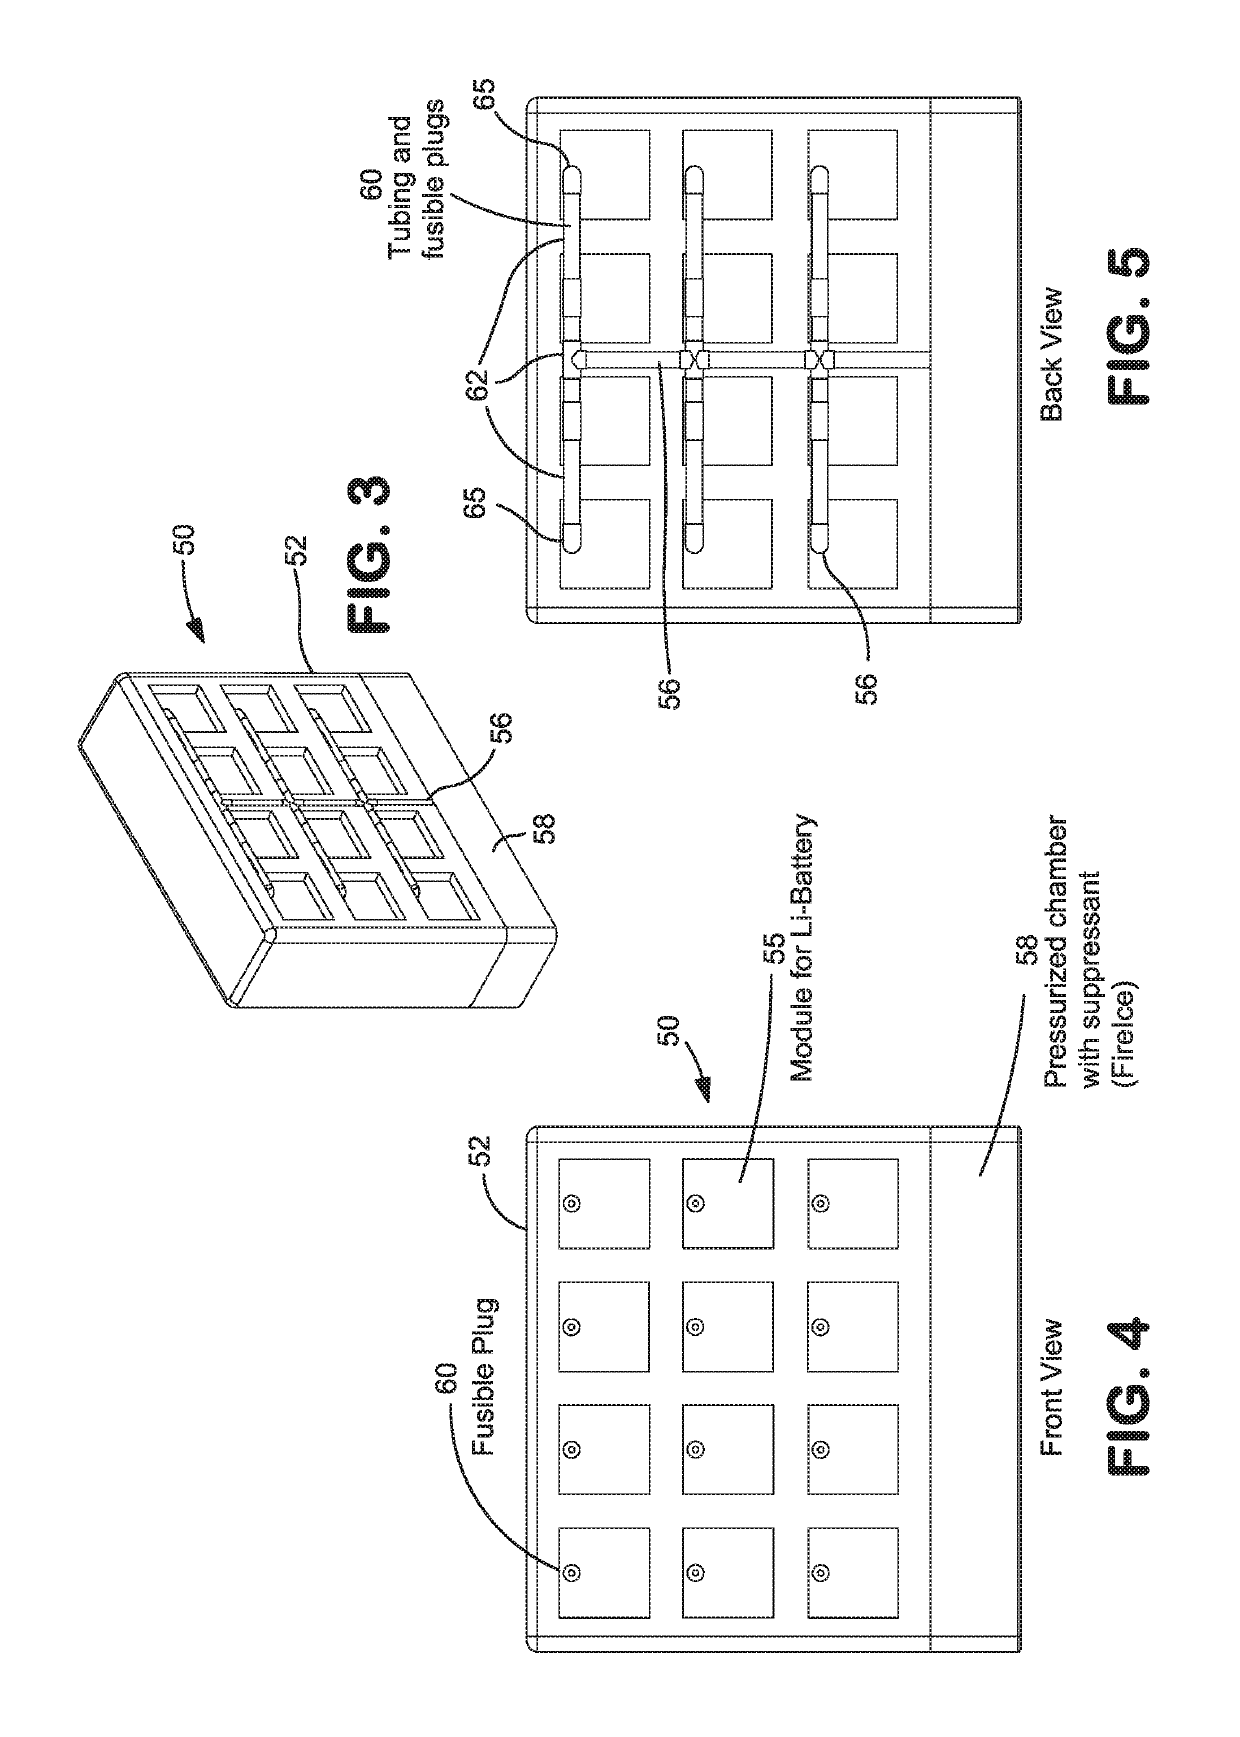 Lithium Ion Battery Suppression System